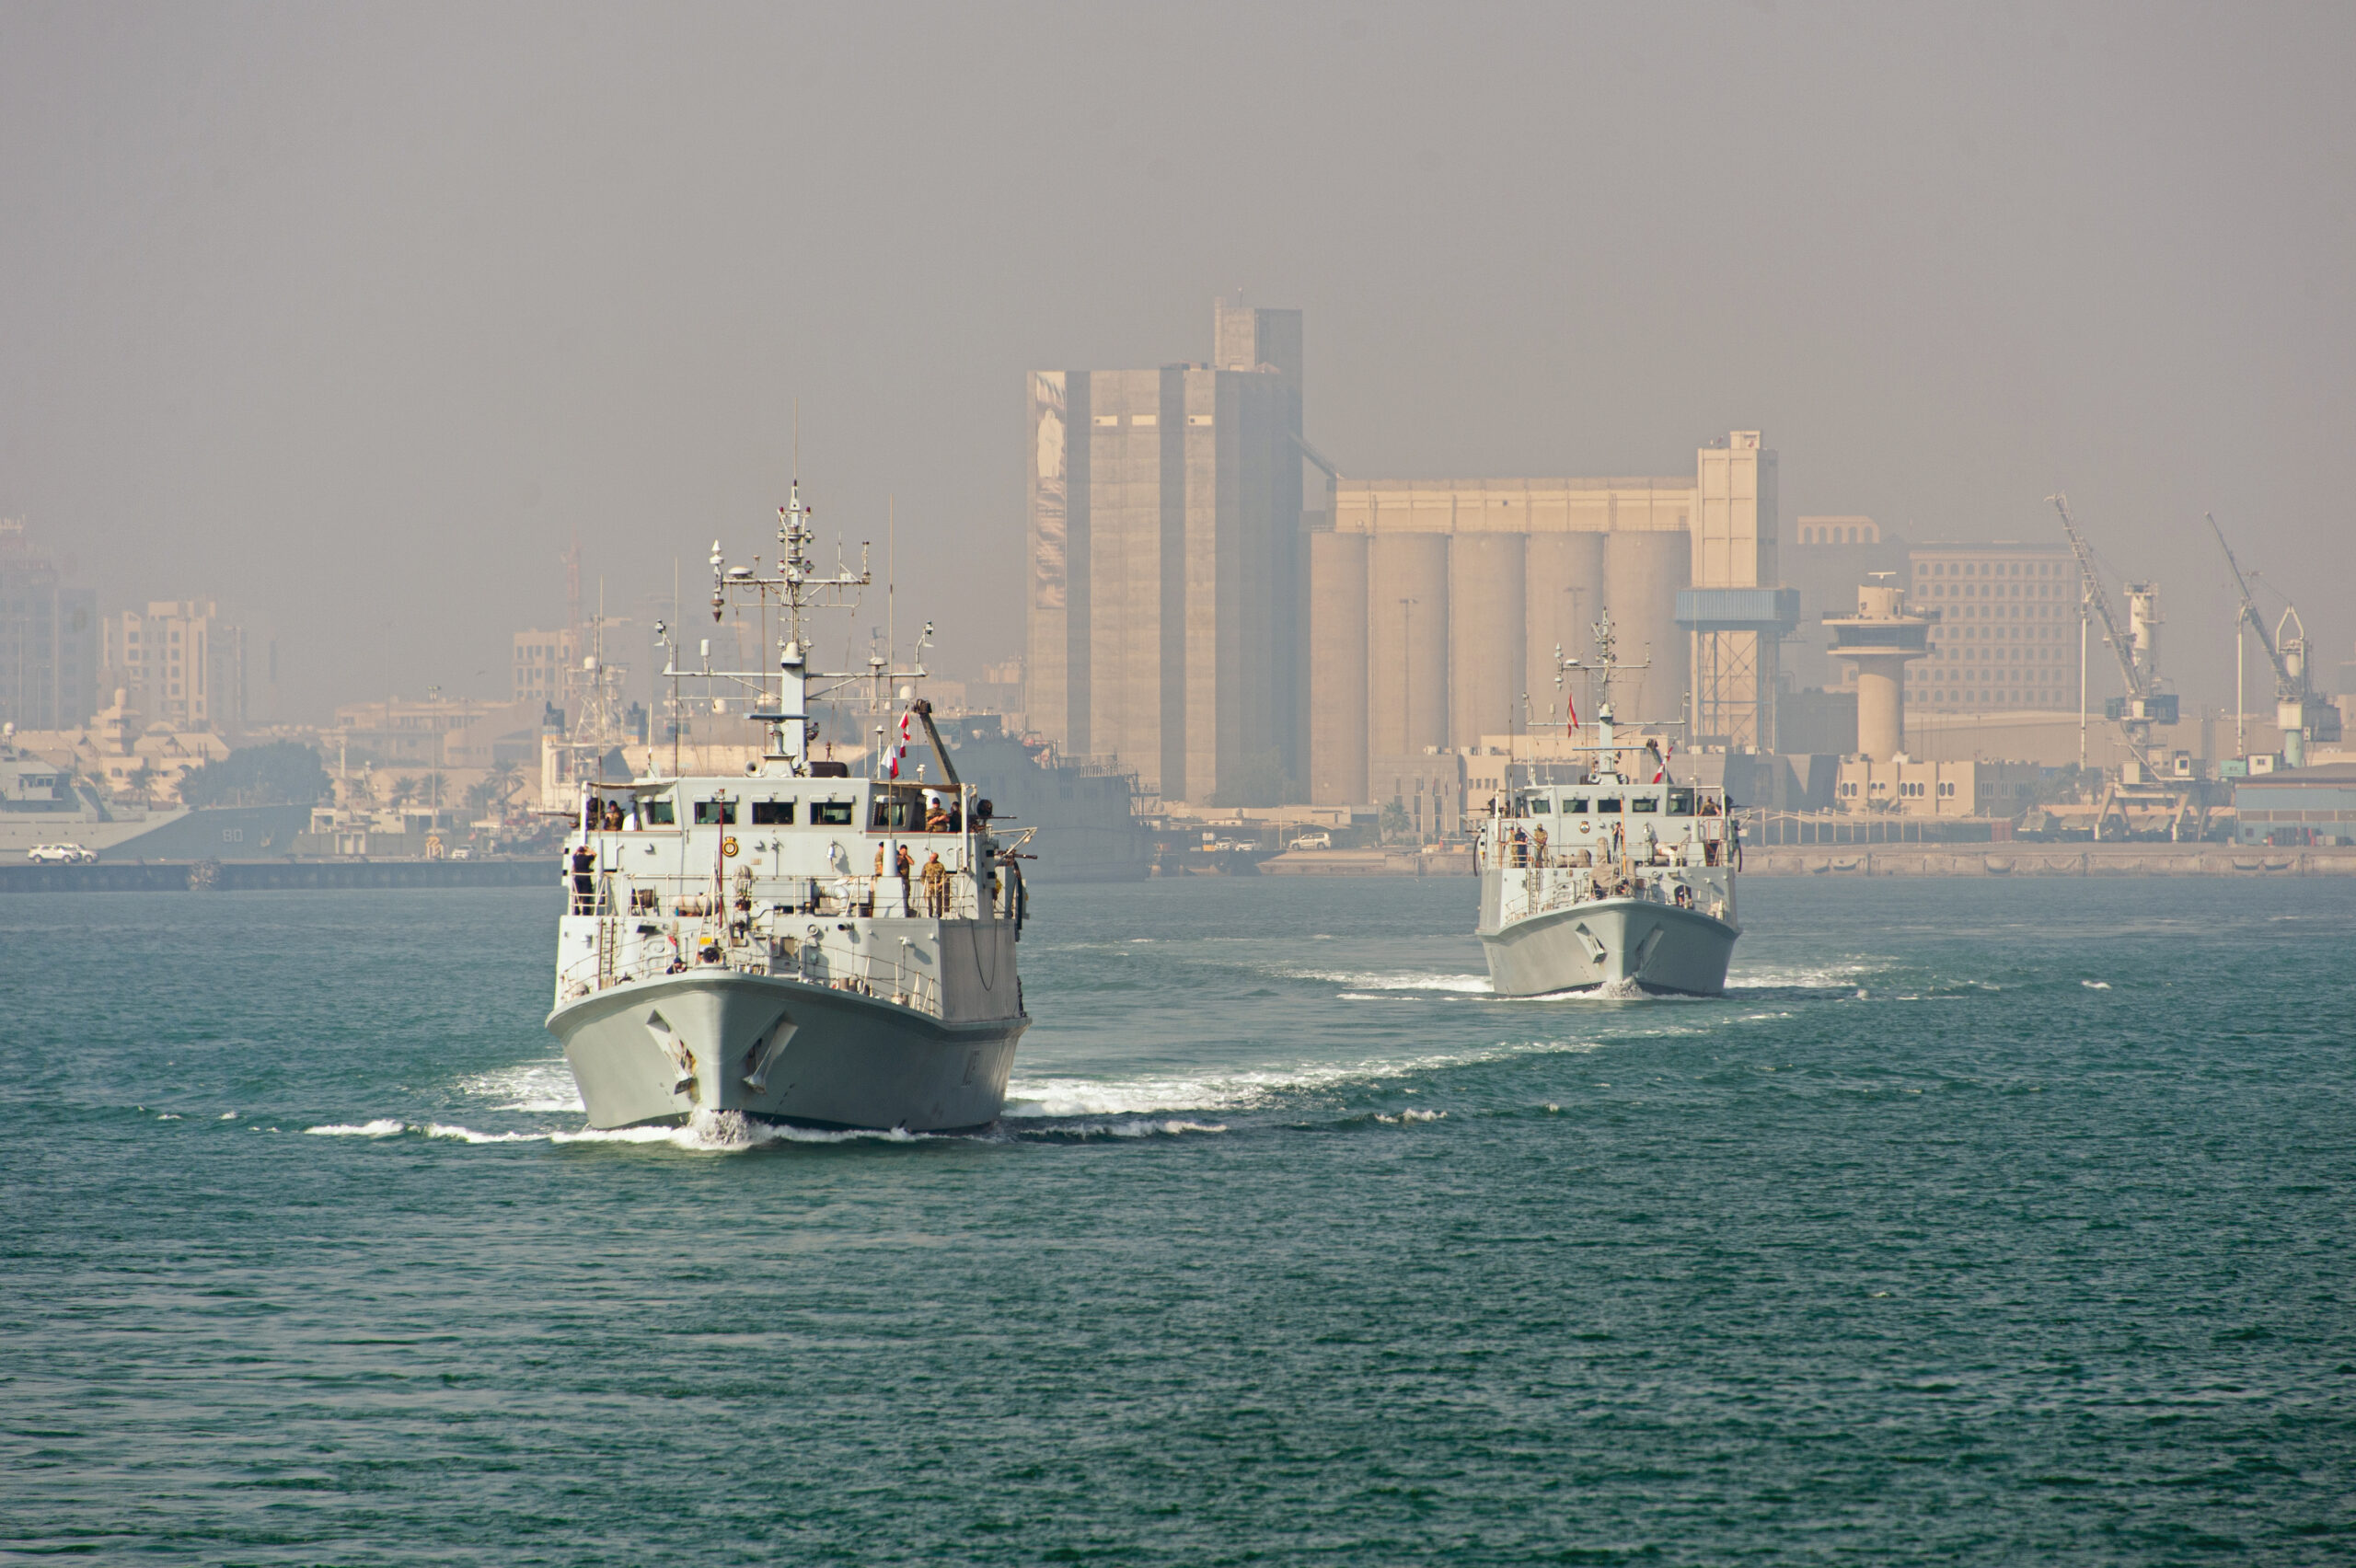 HMS Penzance leads HMS Shoreham out of Mina Salman Port in Bahrain whilst deployed on Op KIPION. The ships are both Sandown Class minehunters, each crewed by a dedicated team of 41. From specially trained divers to remote mine disposal system experts, this courageous unit detects and destroys hidden dangers all over the globe.